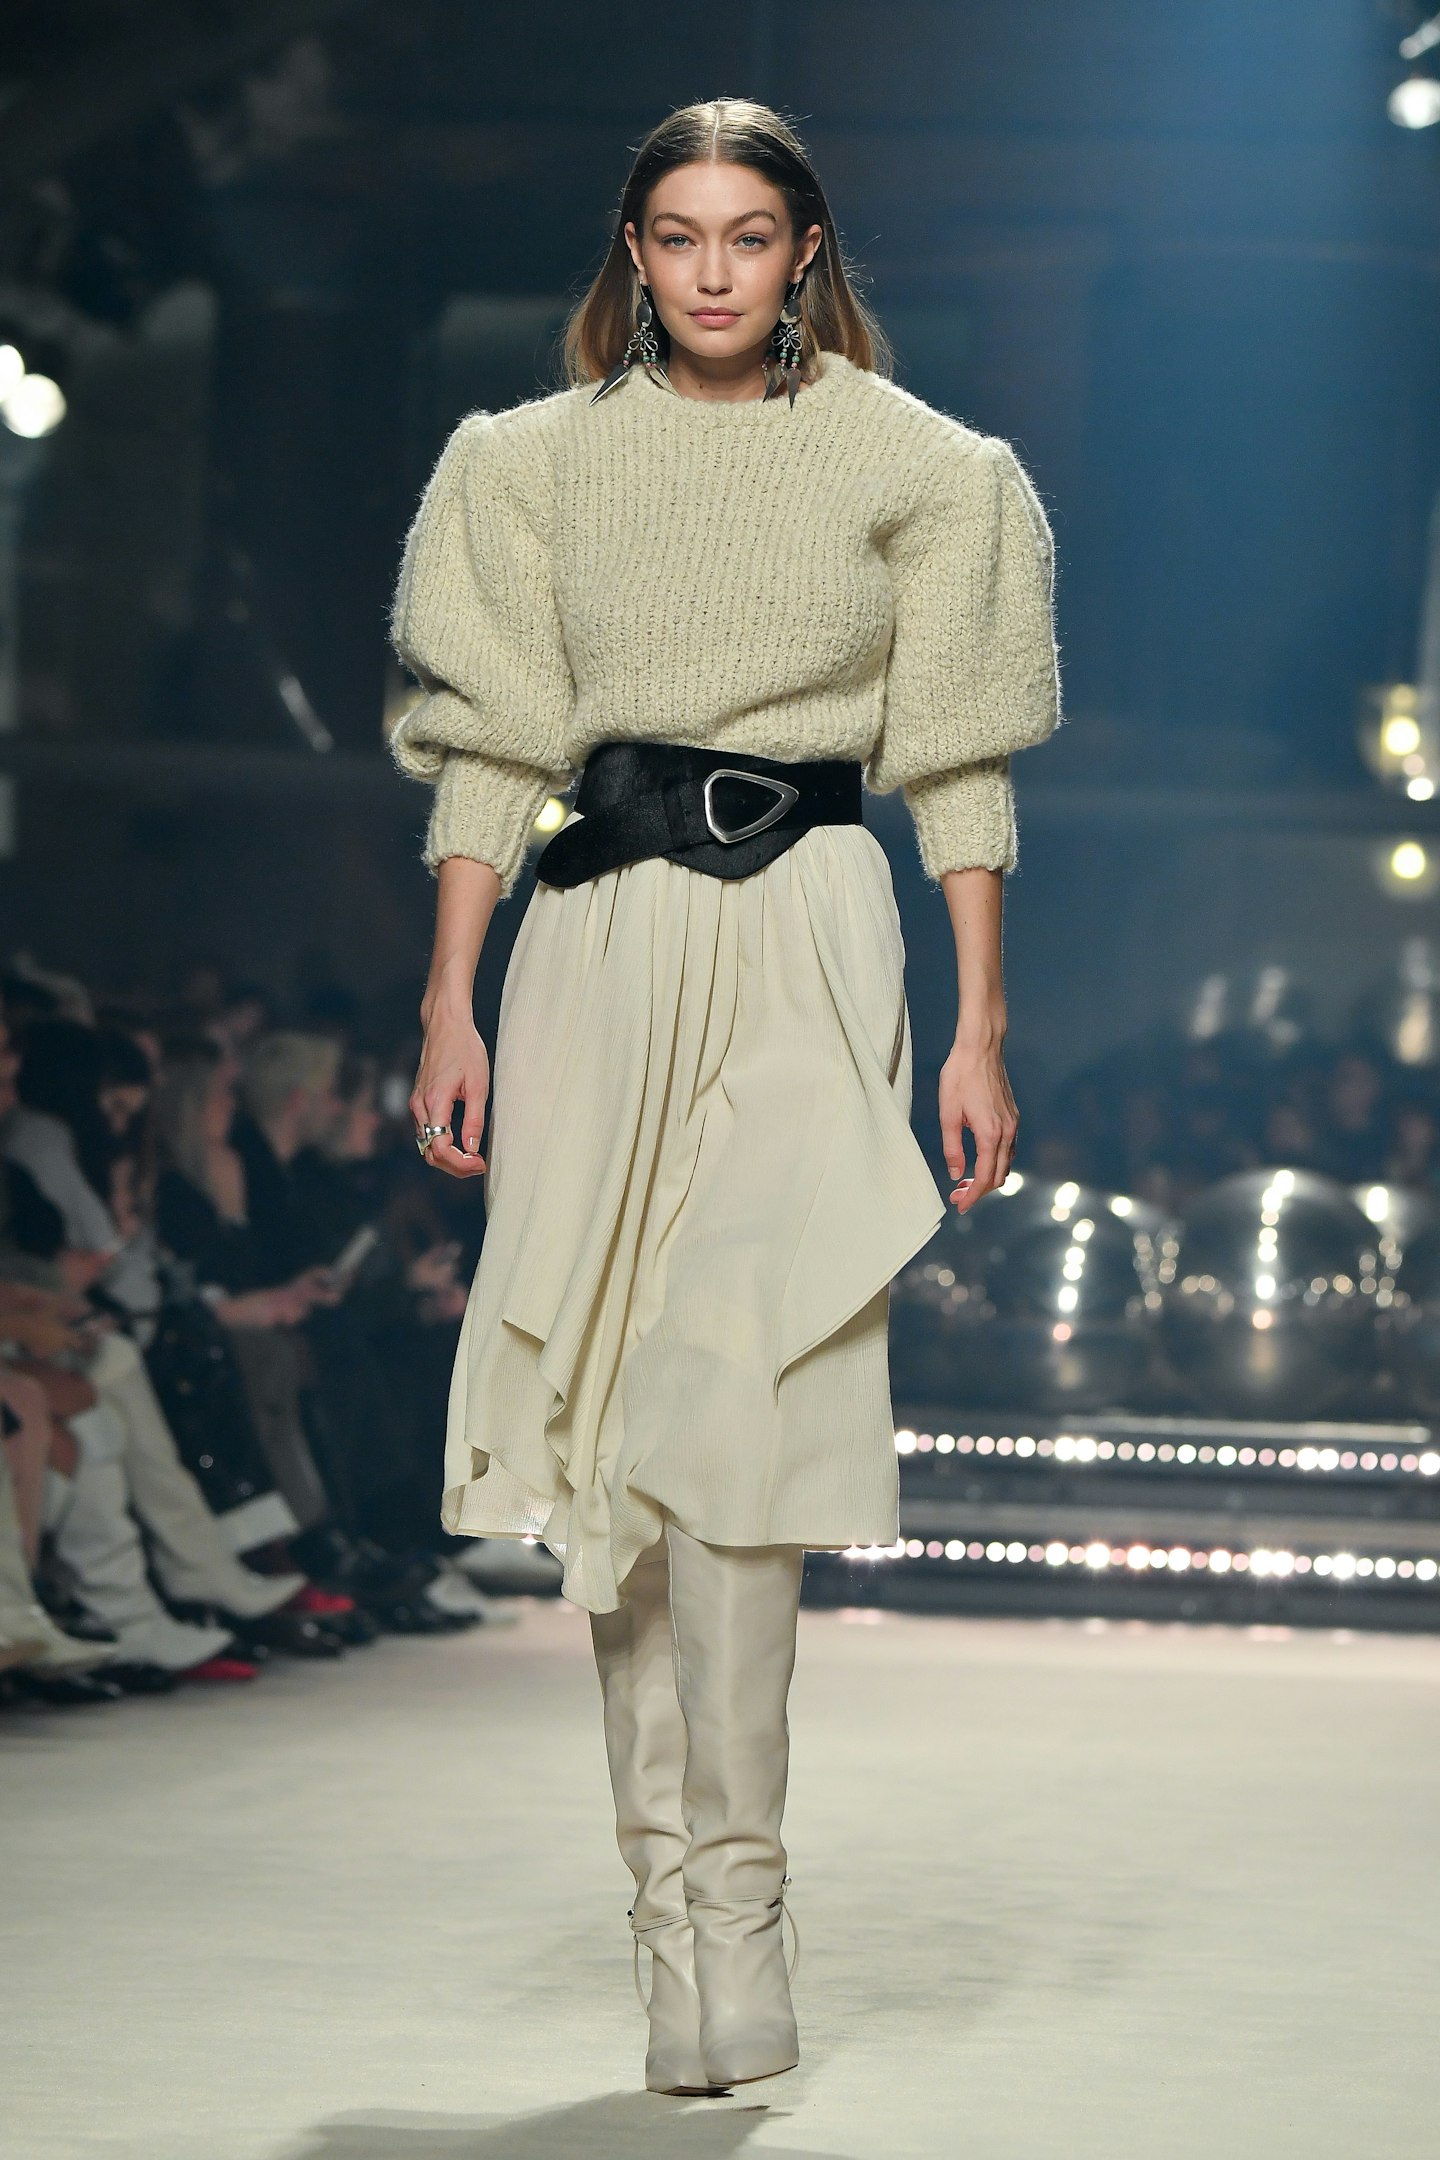 Isabel Marant signals to the waist